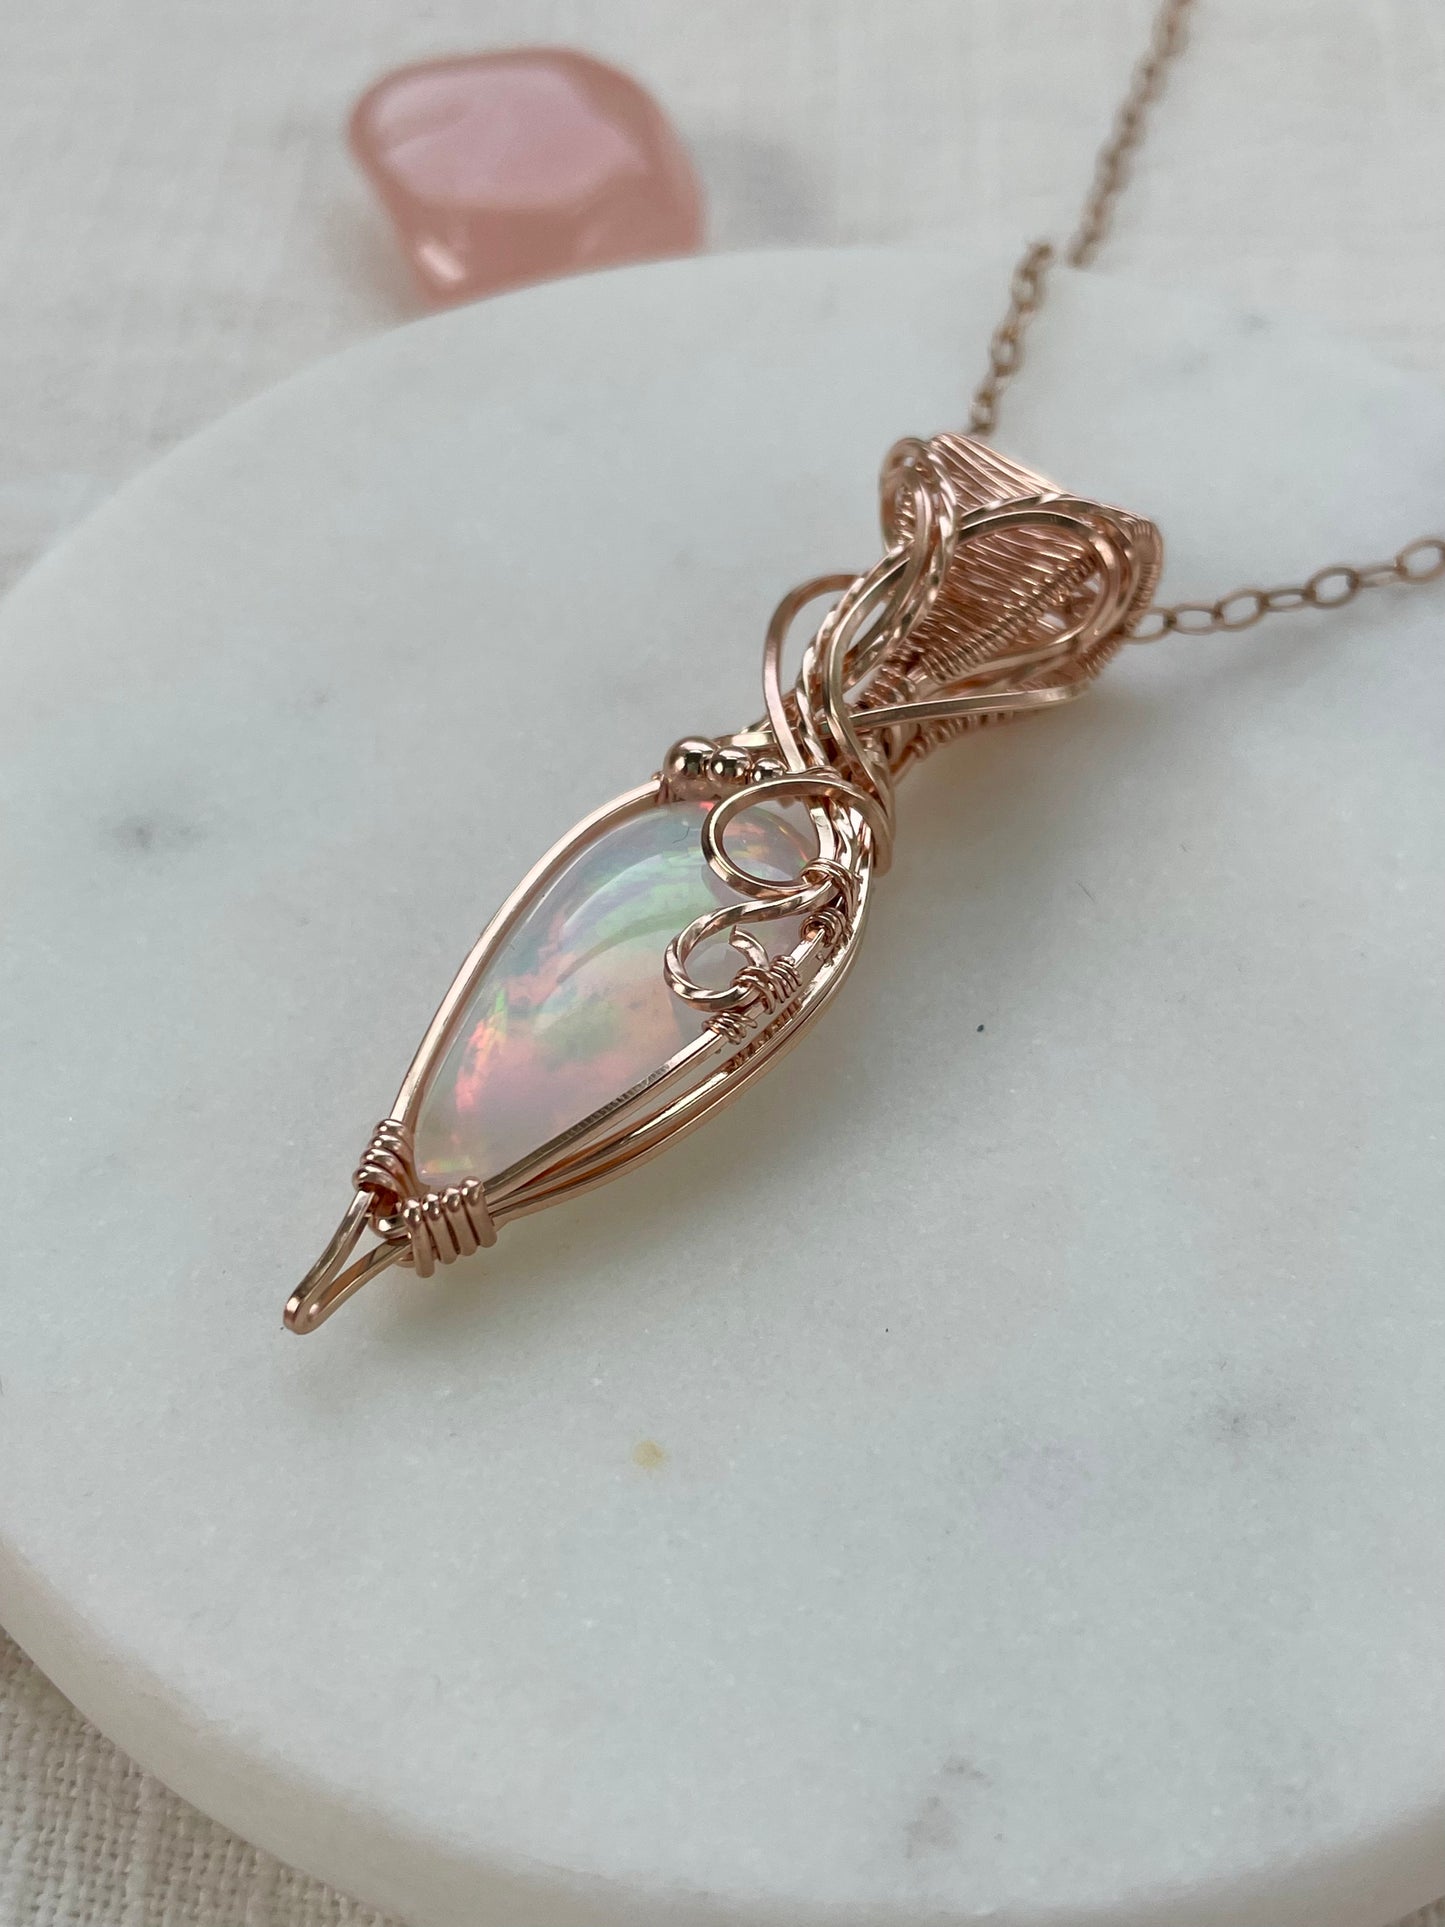 11ct Honeycomb Pattern Ethiopian Opal Necklace in 14k Rose Gold Filled